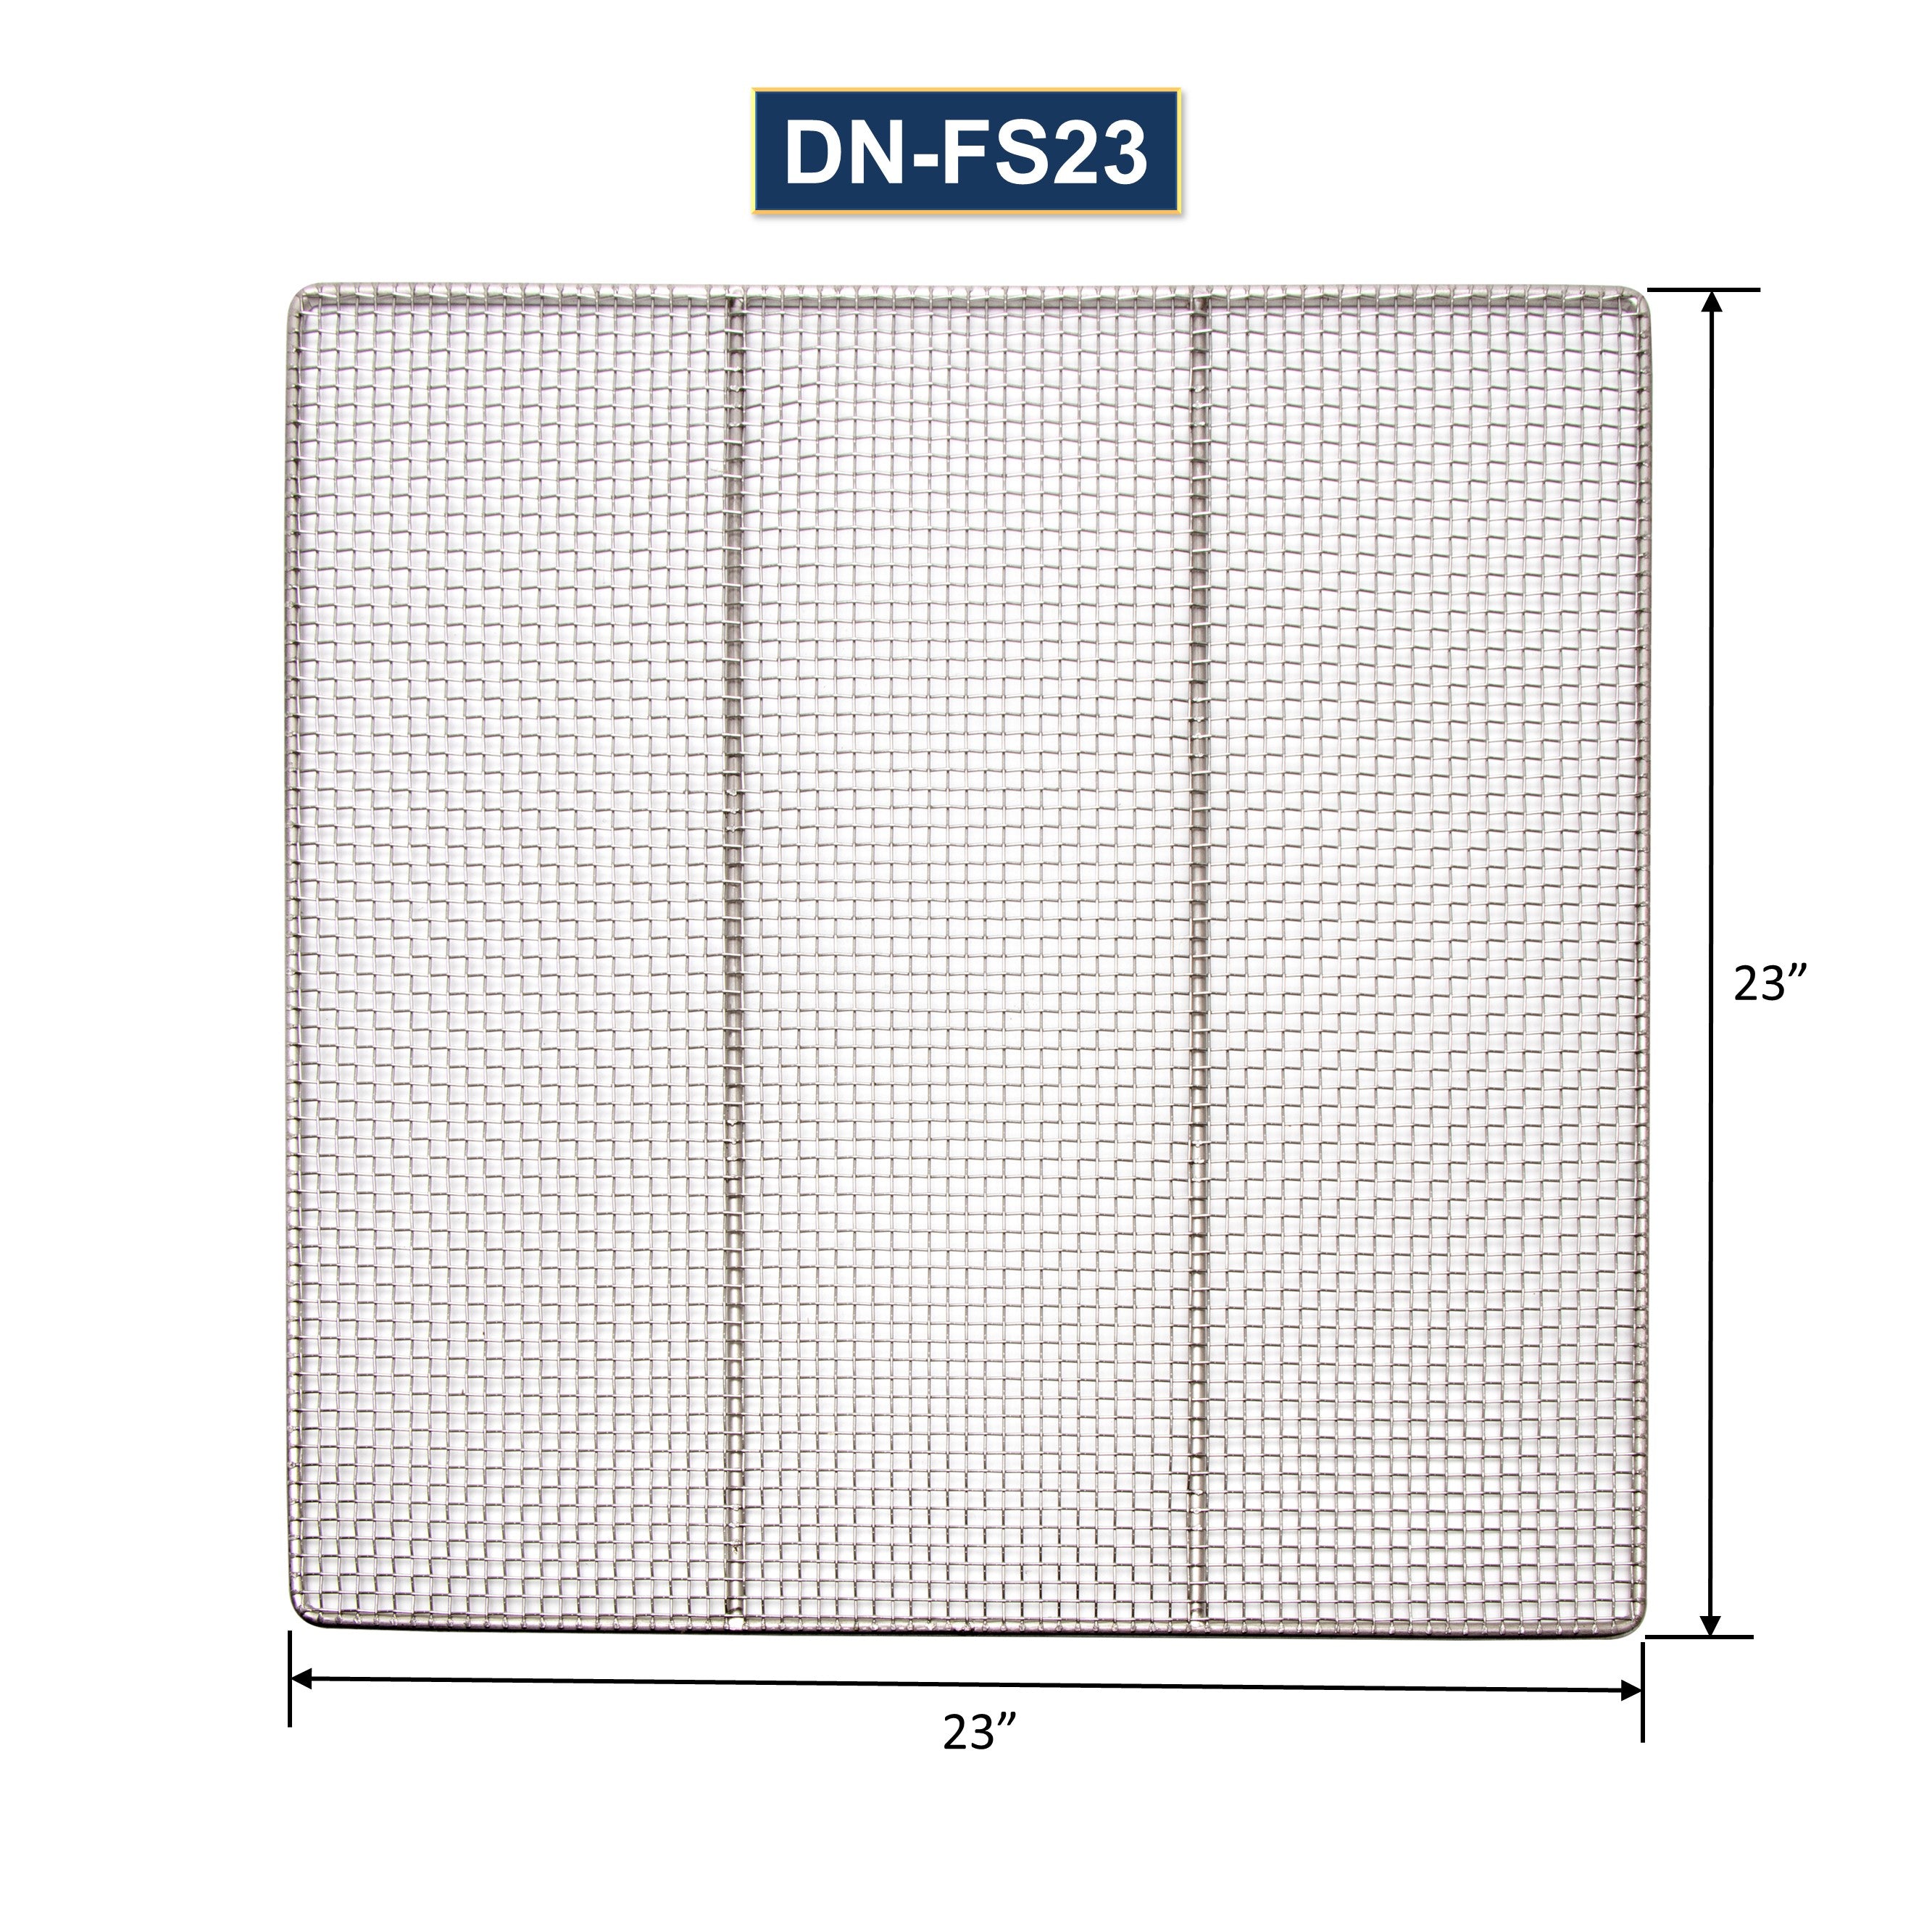 GSW 23" x 23" DN-FS23 Heavy Duty 19 Gauge 4-mesh Stainless Steel Woven Mesh Donut Frying Screen, 1/4"D Outer Frame and Support Rods